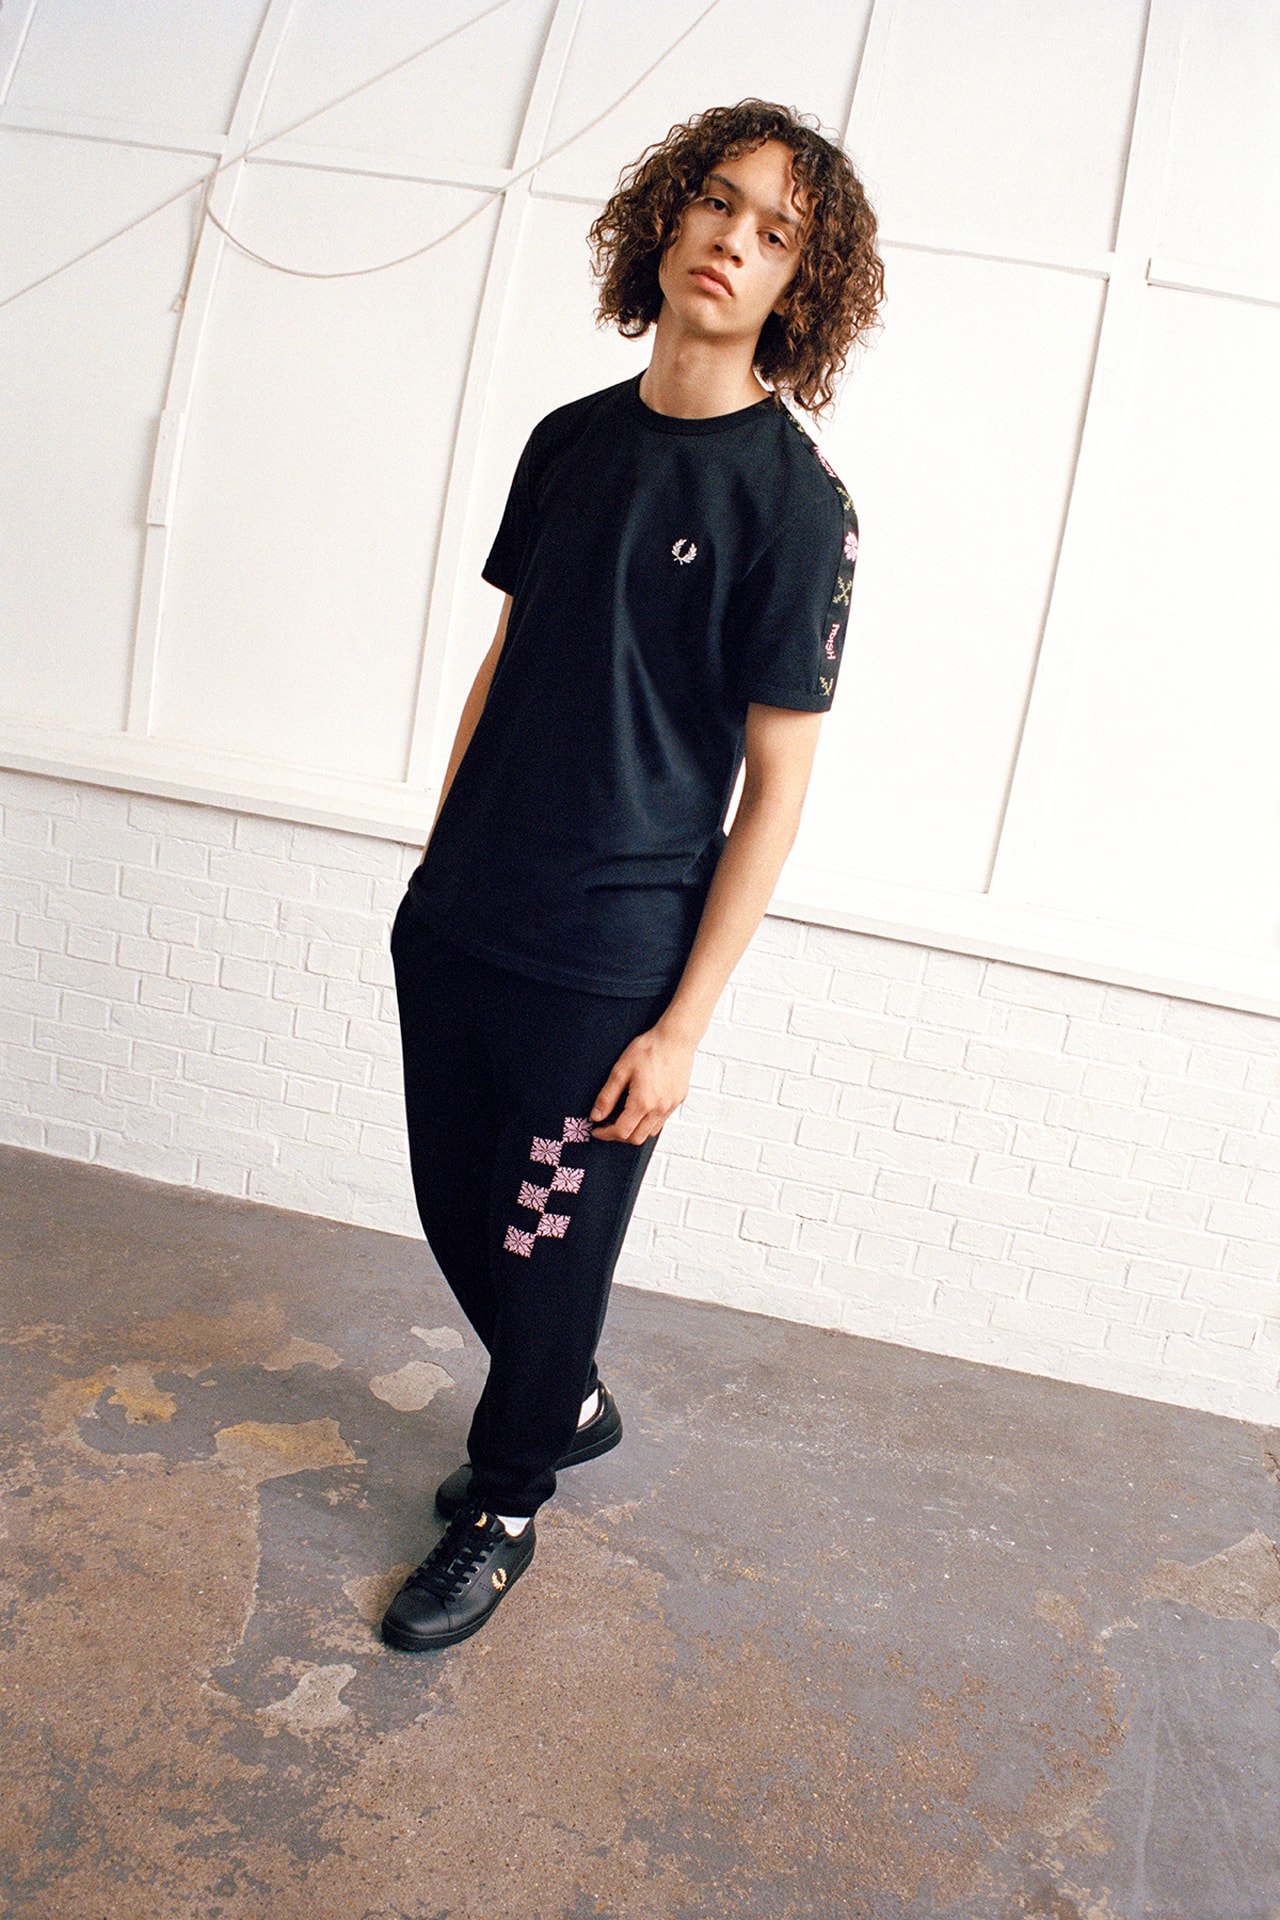 Fred Perry And ADISH Connect For New Palestine-Focused Collaboration Collection